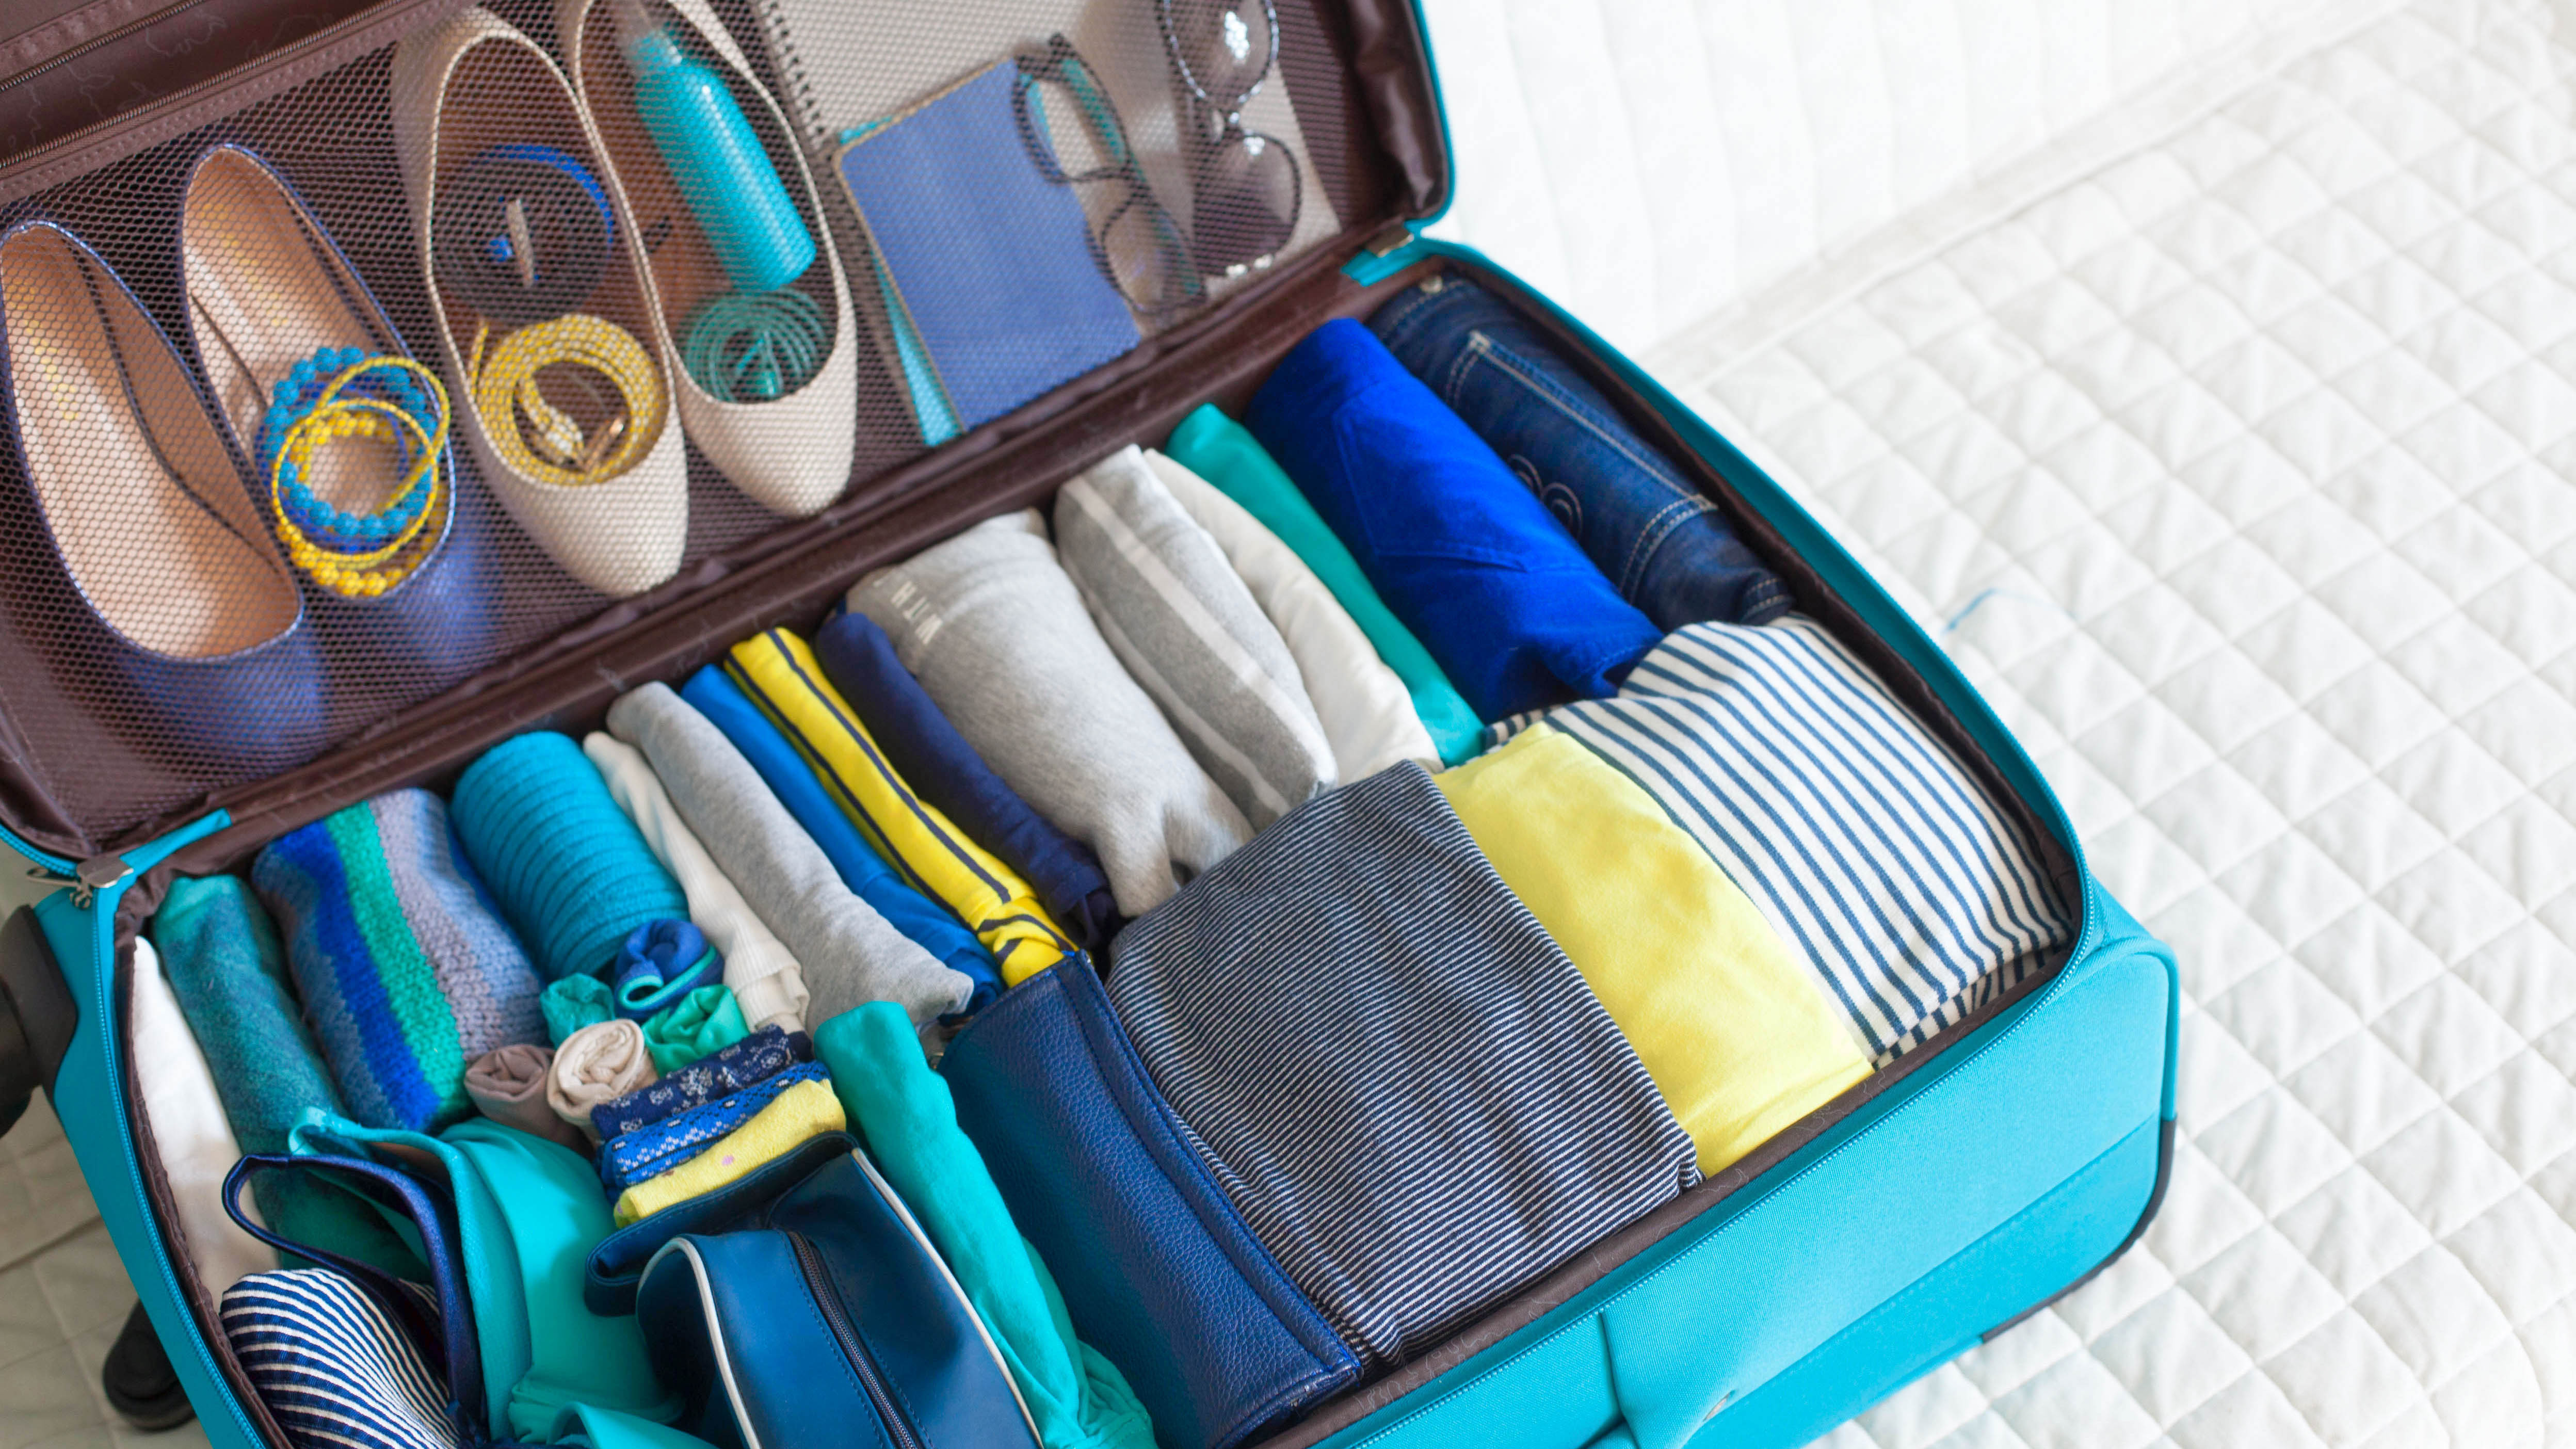 Packed suitcase with small items in footwear